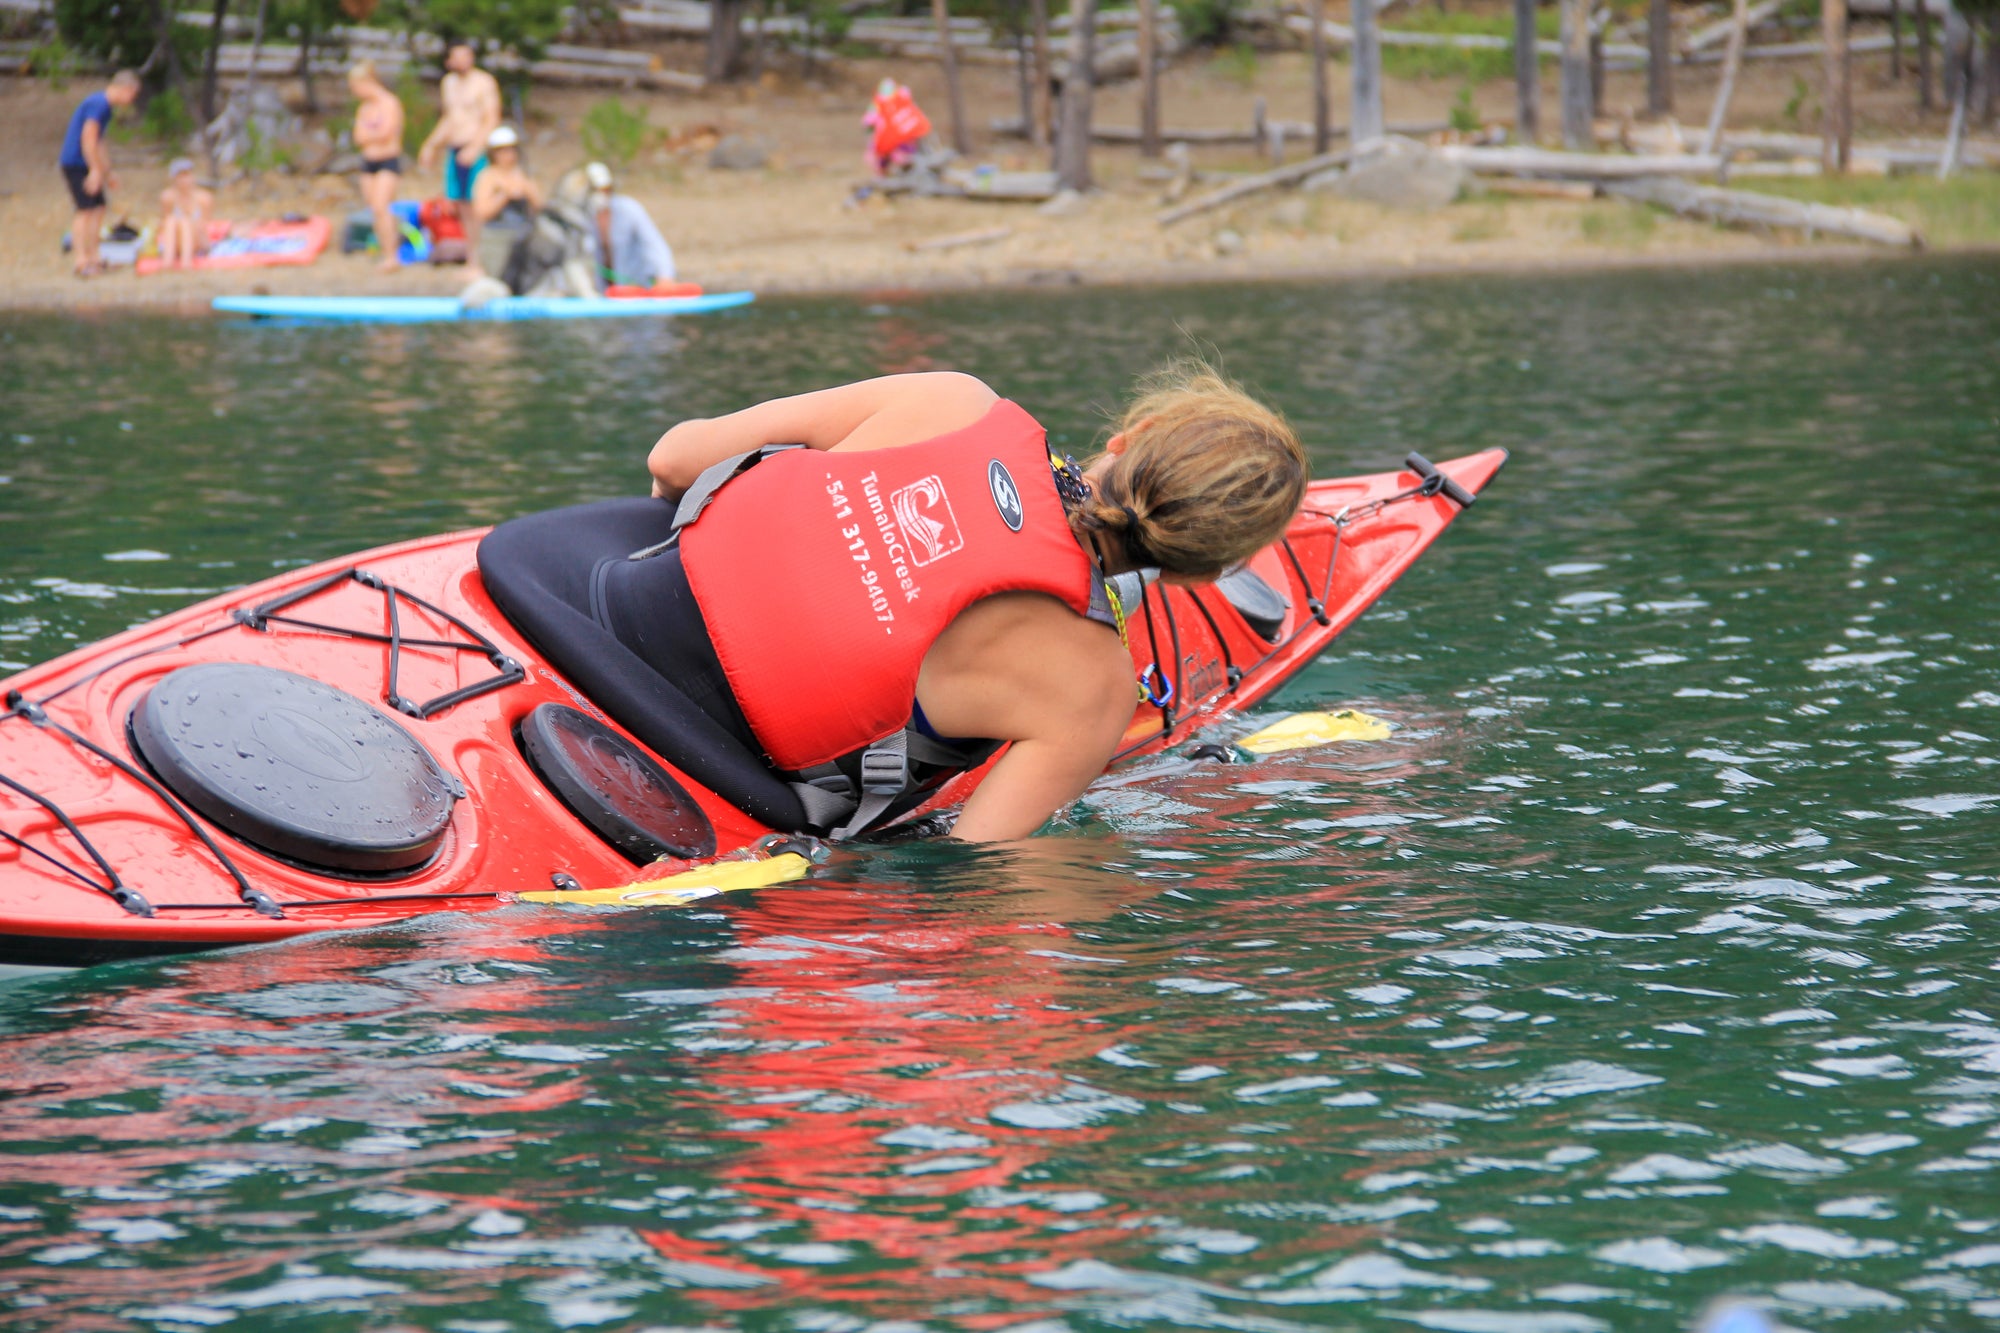 Personal Challenge: 5 secrets to learning how to roll your kayak this year